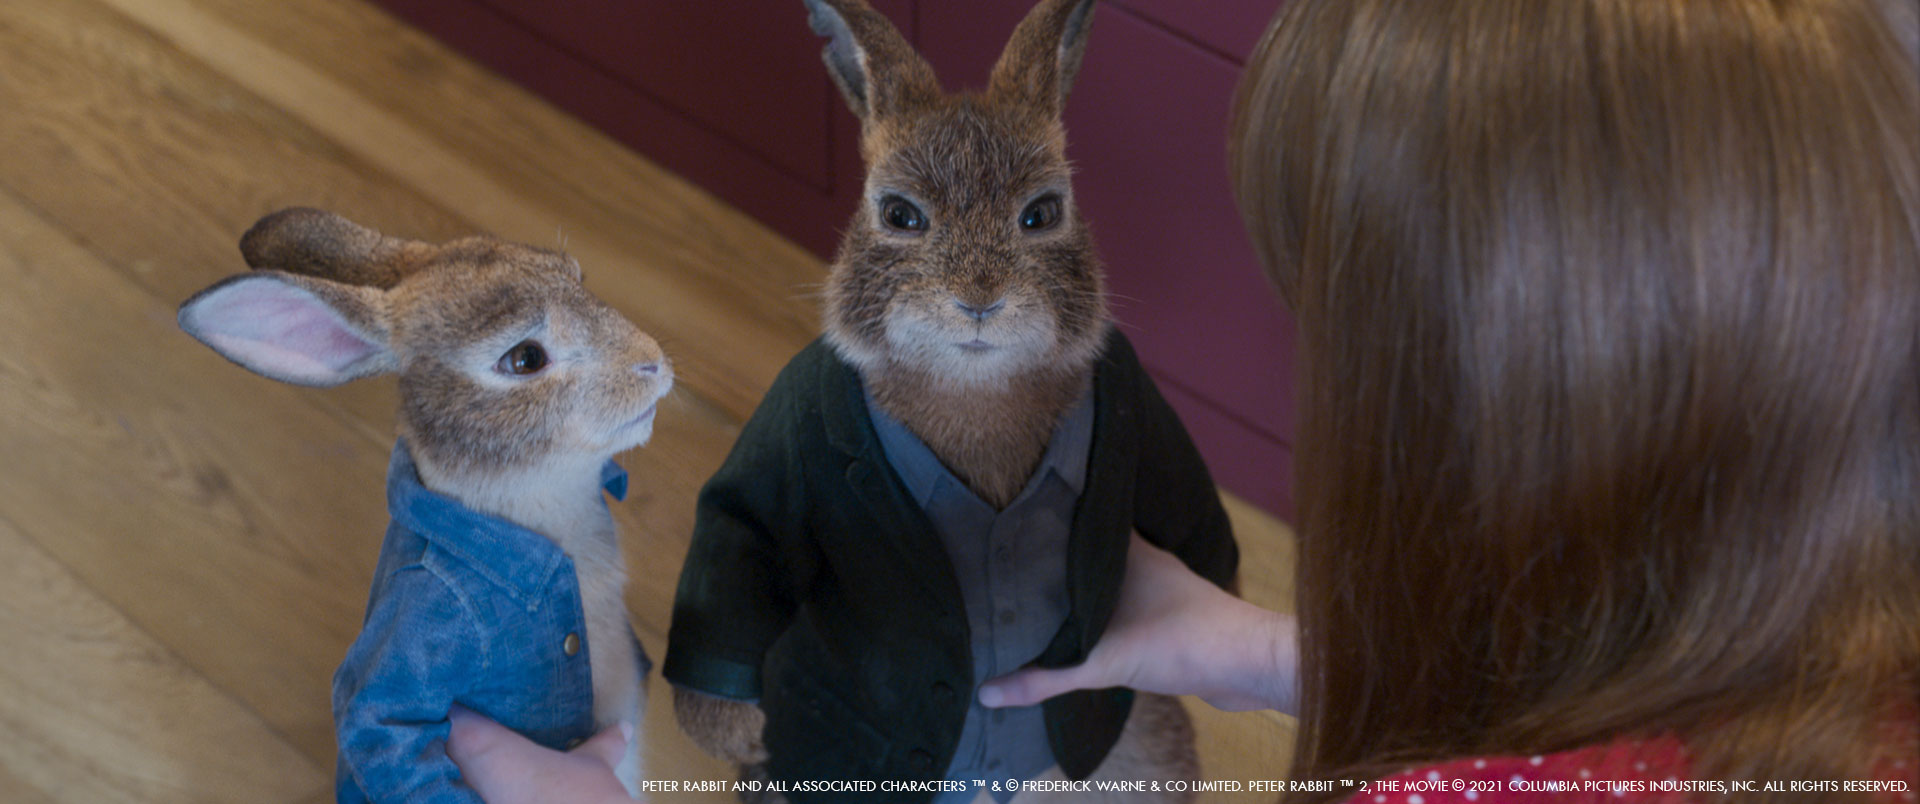 What can children learn from crime classics like Peter Rabbit